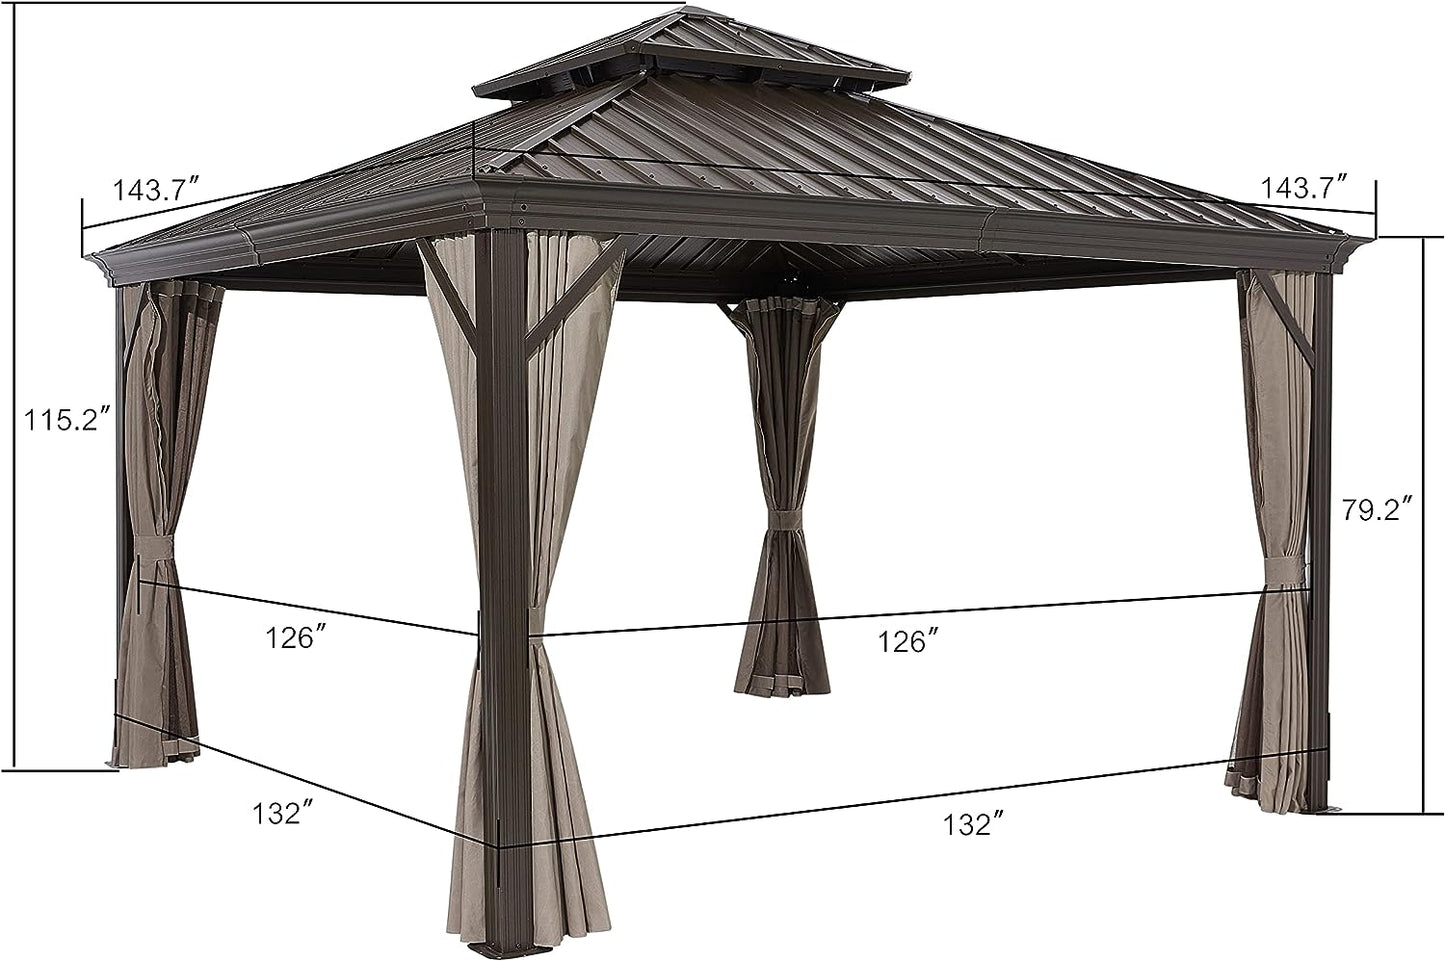 LUCKYBERRY 12 X 12 FT Galvanized Steel Hard Top Gazebo Canopy with Netting, Brown